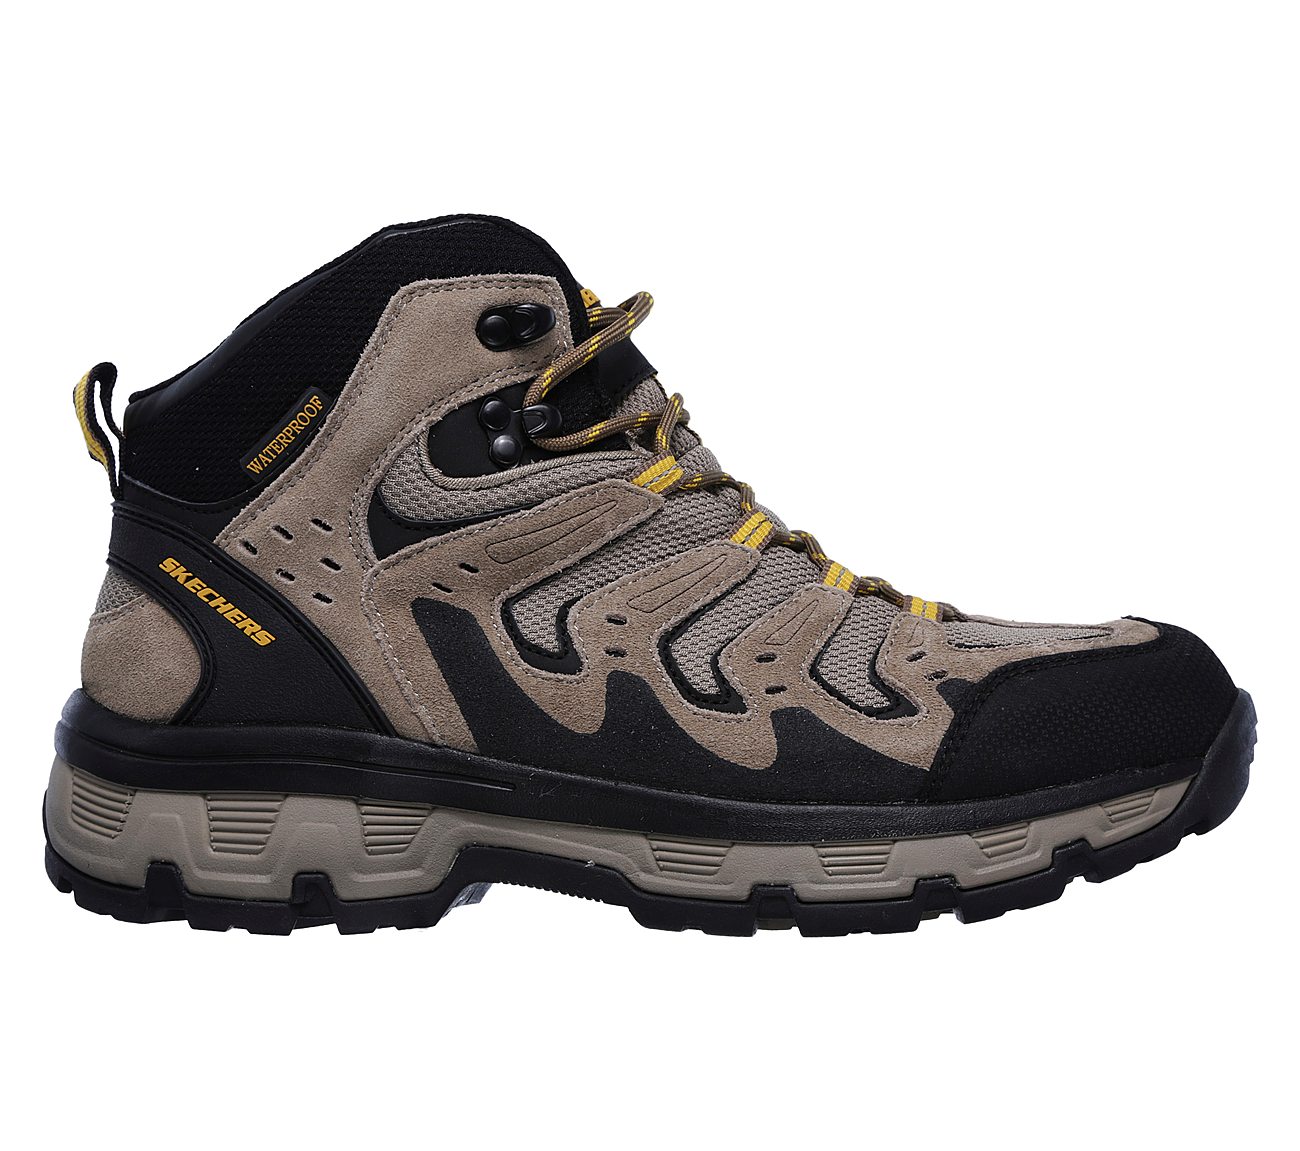 skechers relaxed fit work boots